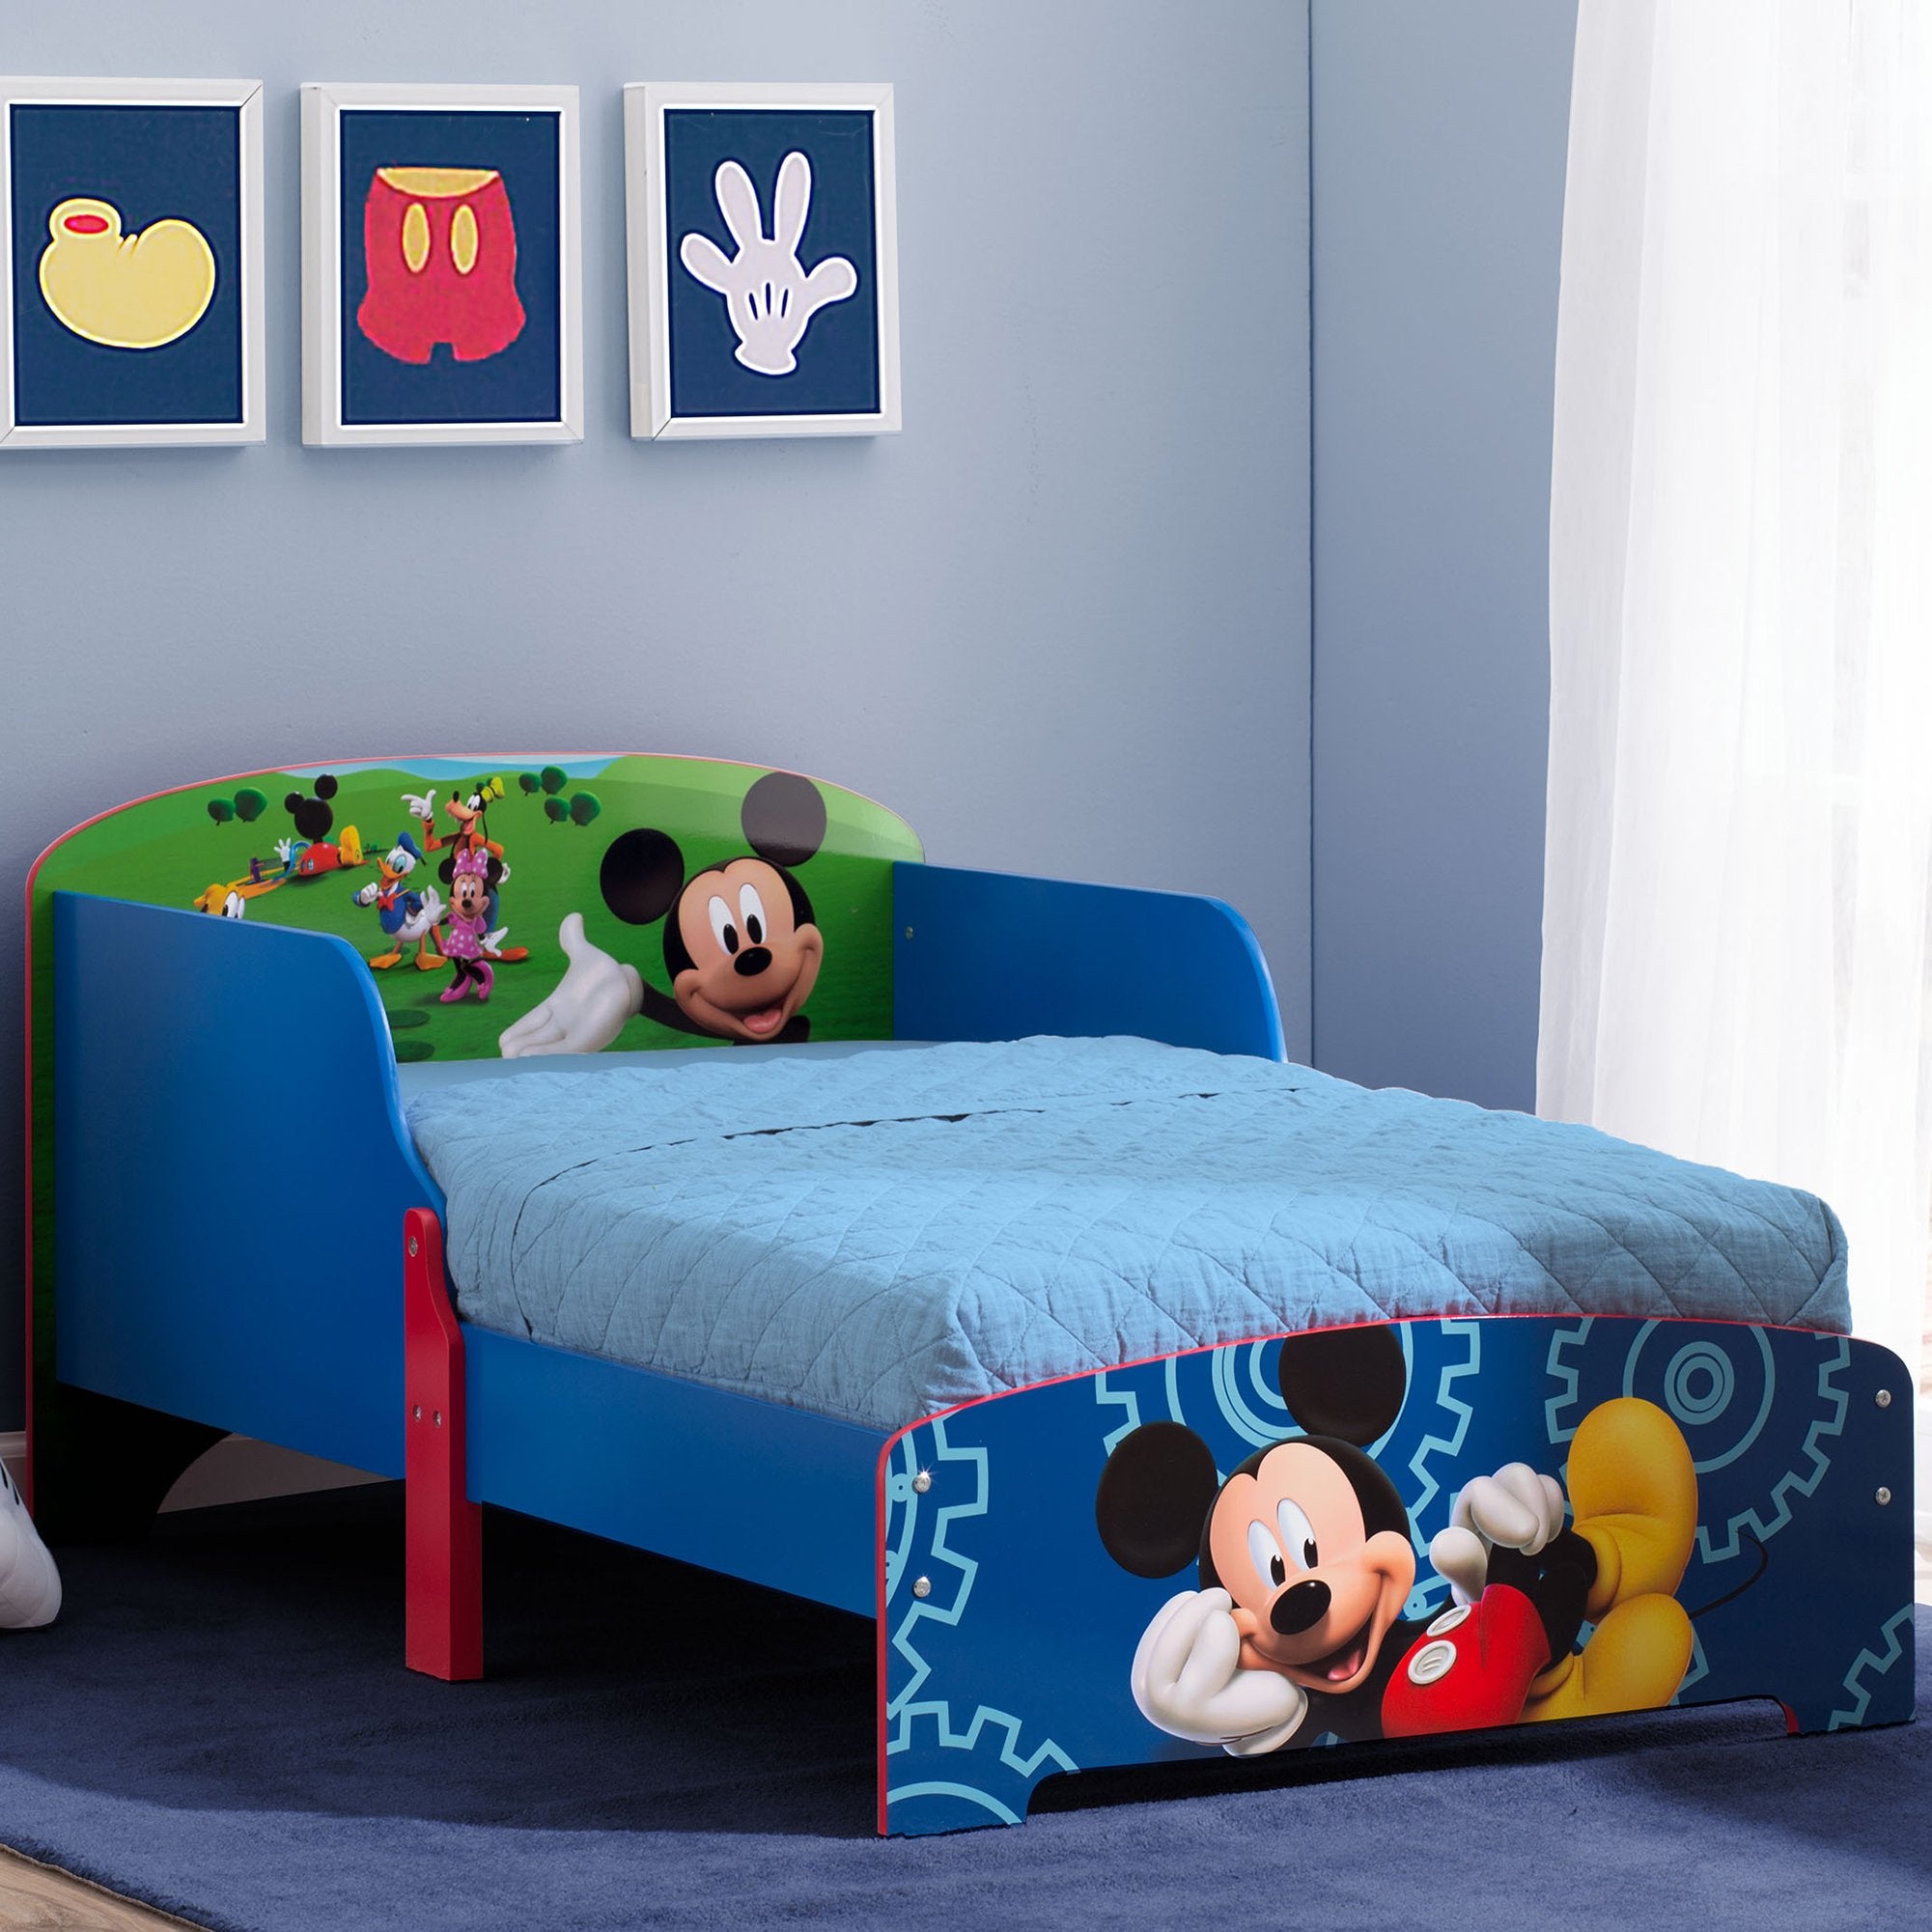 Mickey Mouse bedroom decor!!!  Mickey mouse bedroom decor, Mickey mouse  room, Disney decor bedroom